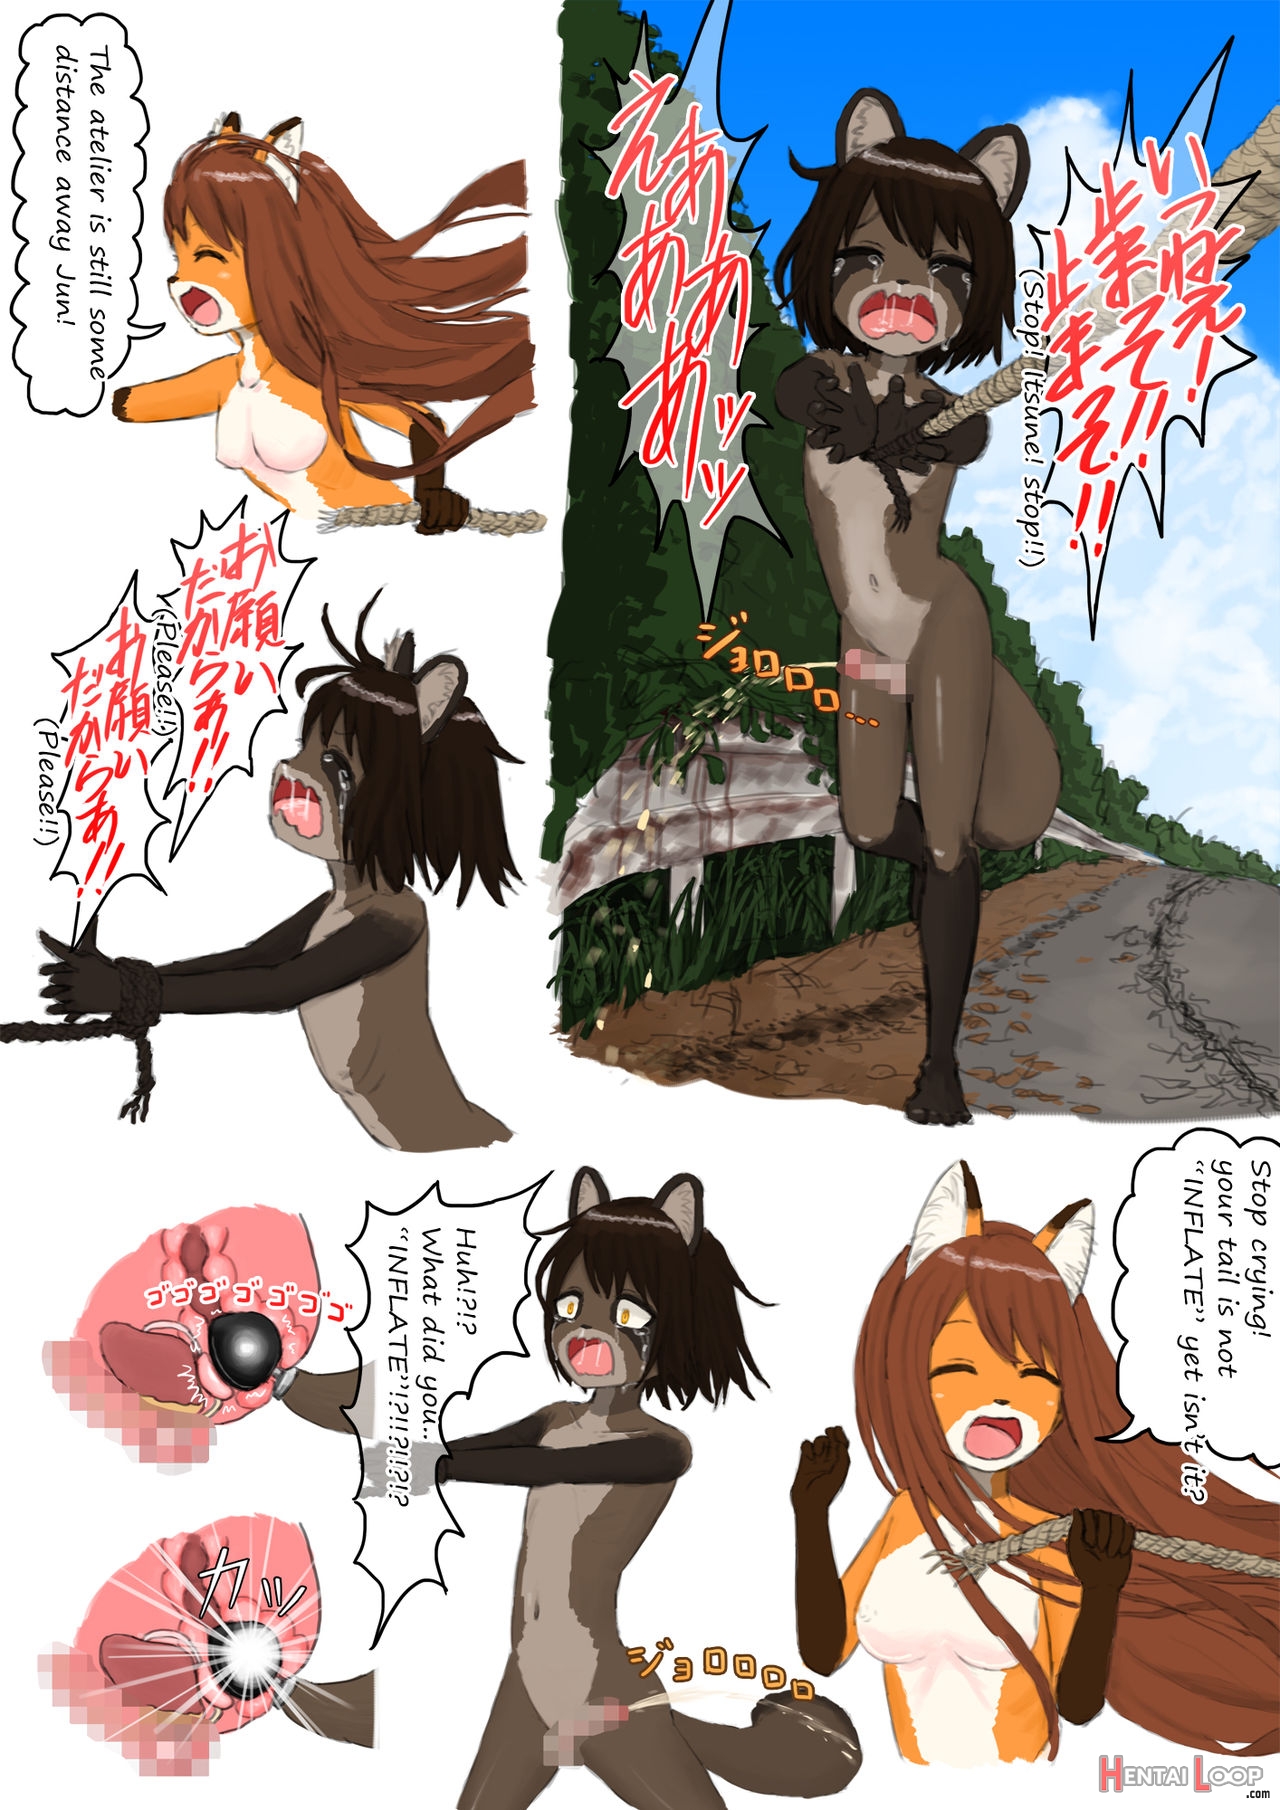 Moved To A Country Side, Became A Salacious Raccoon. page 37